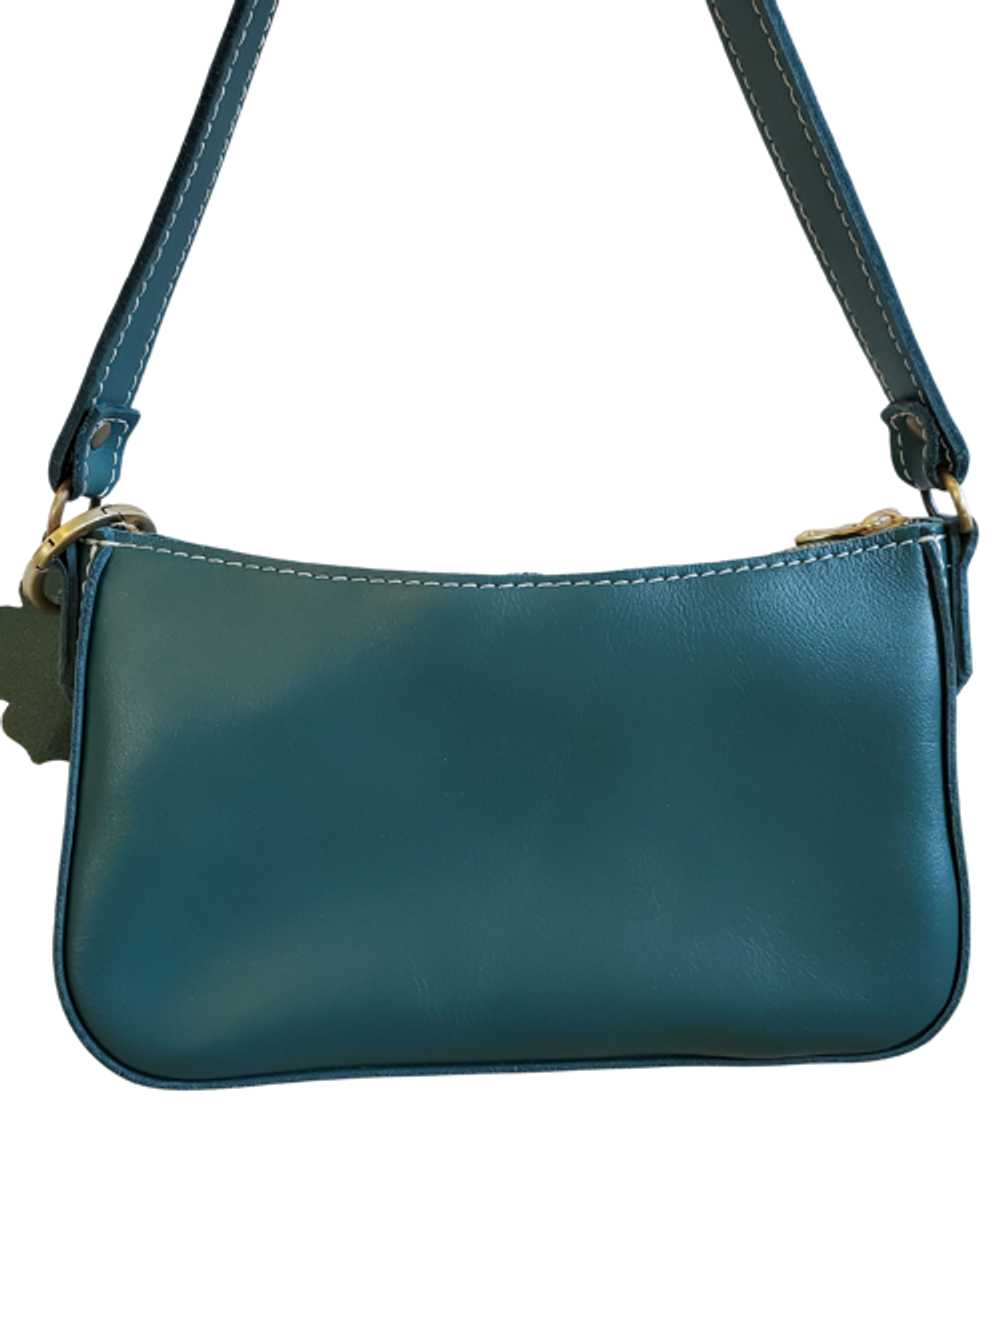 Portland Leather Premium Lucy Baguette in Peacock - image 5